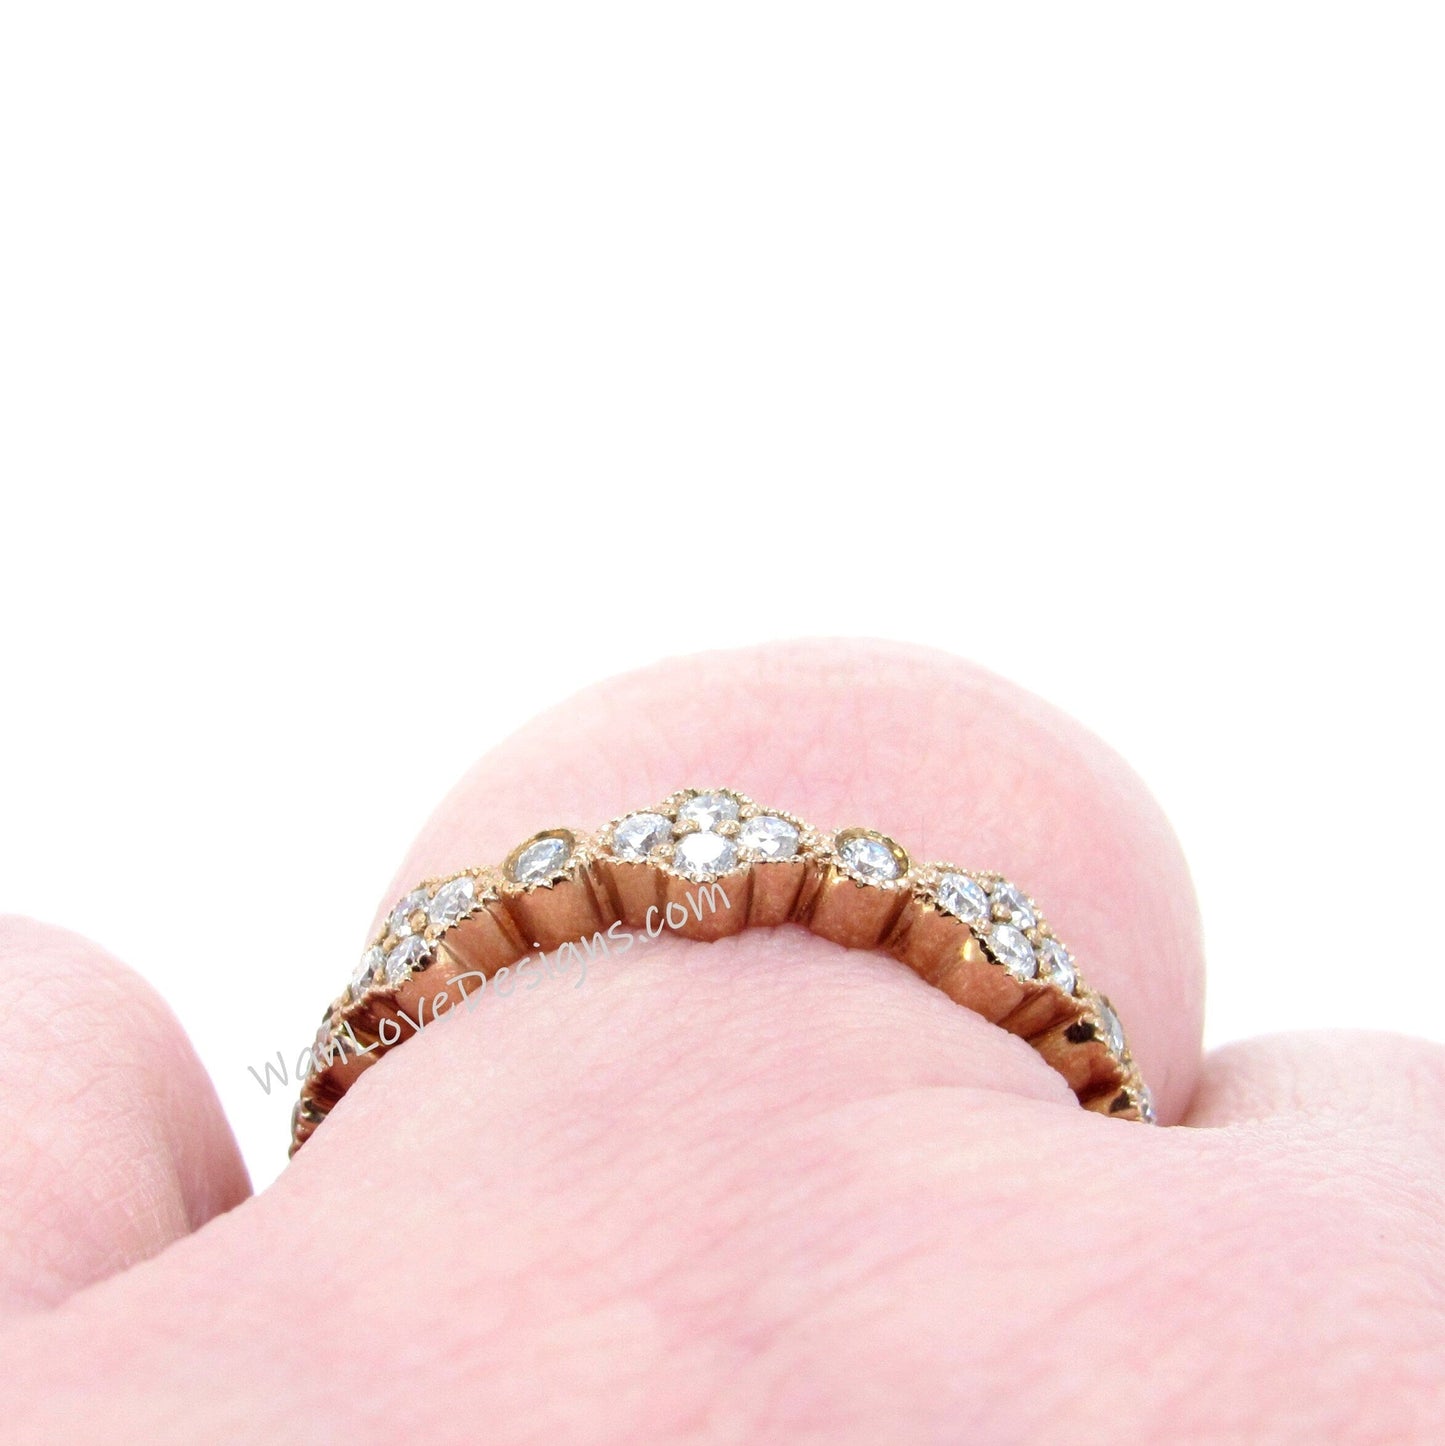 Unique moissanite wedding band, Moissanite stacking ring, Floral Quatrefoil Moissanite stacking band, White Rose gold ring-Ready to Ship Wan Love Designs